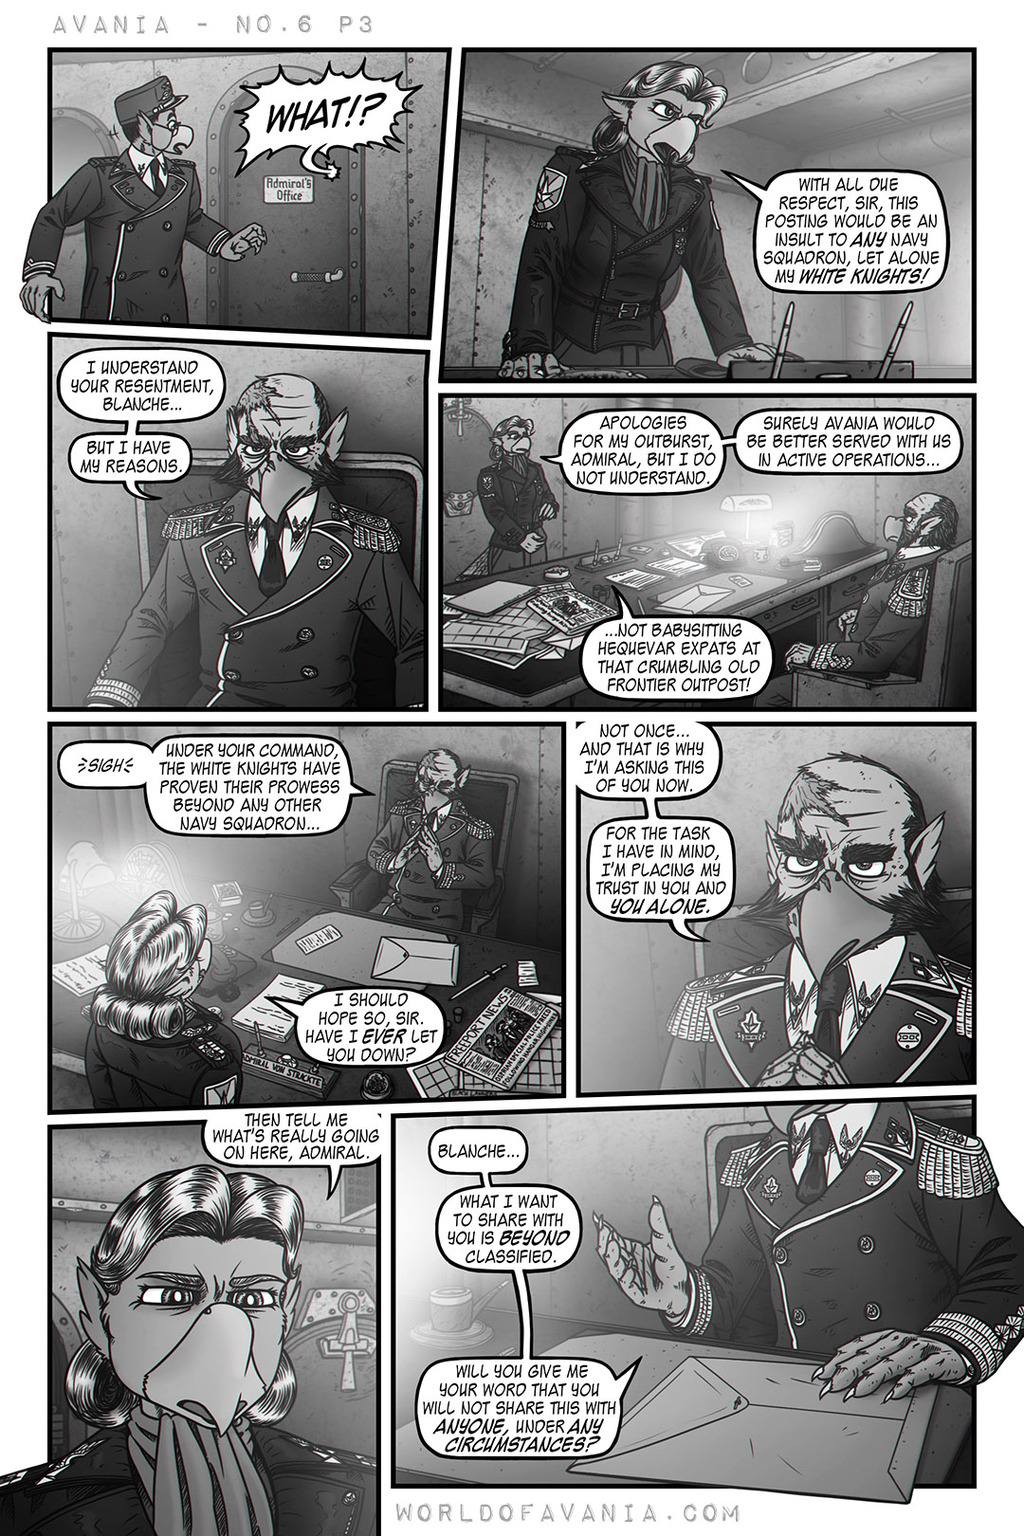 Avania Comic - Issue No.6, Page 3